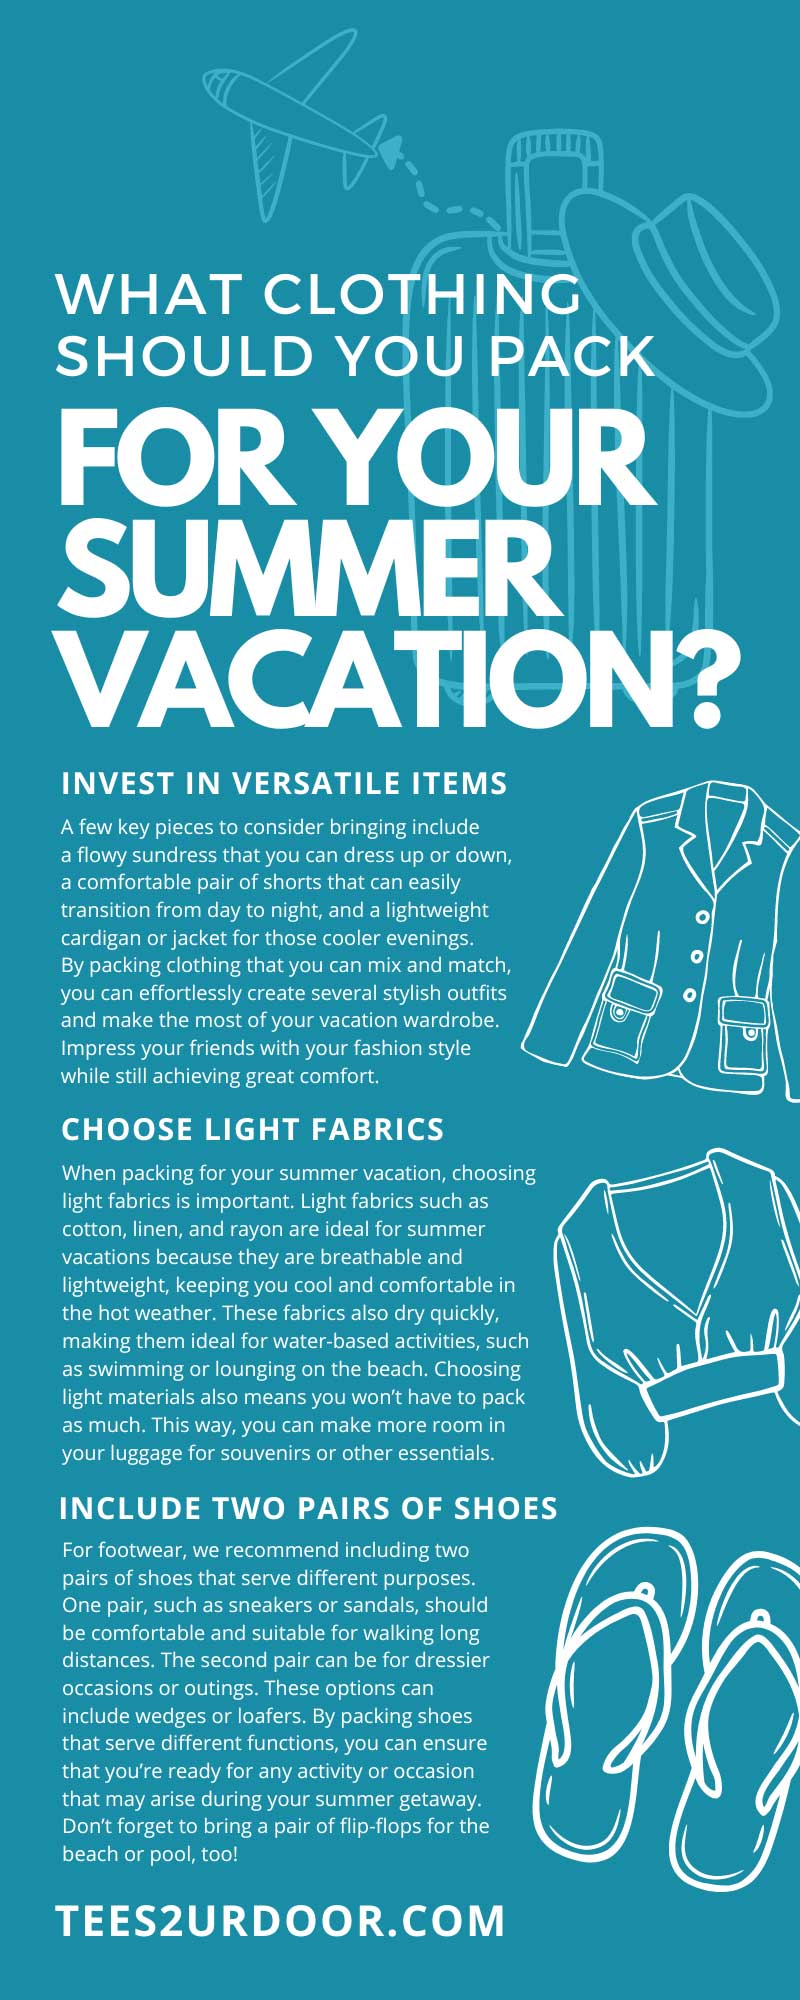 What Clothing Should You Pack for Your Summer Vacation?